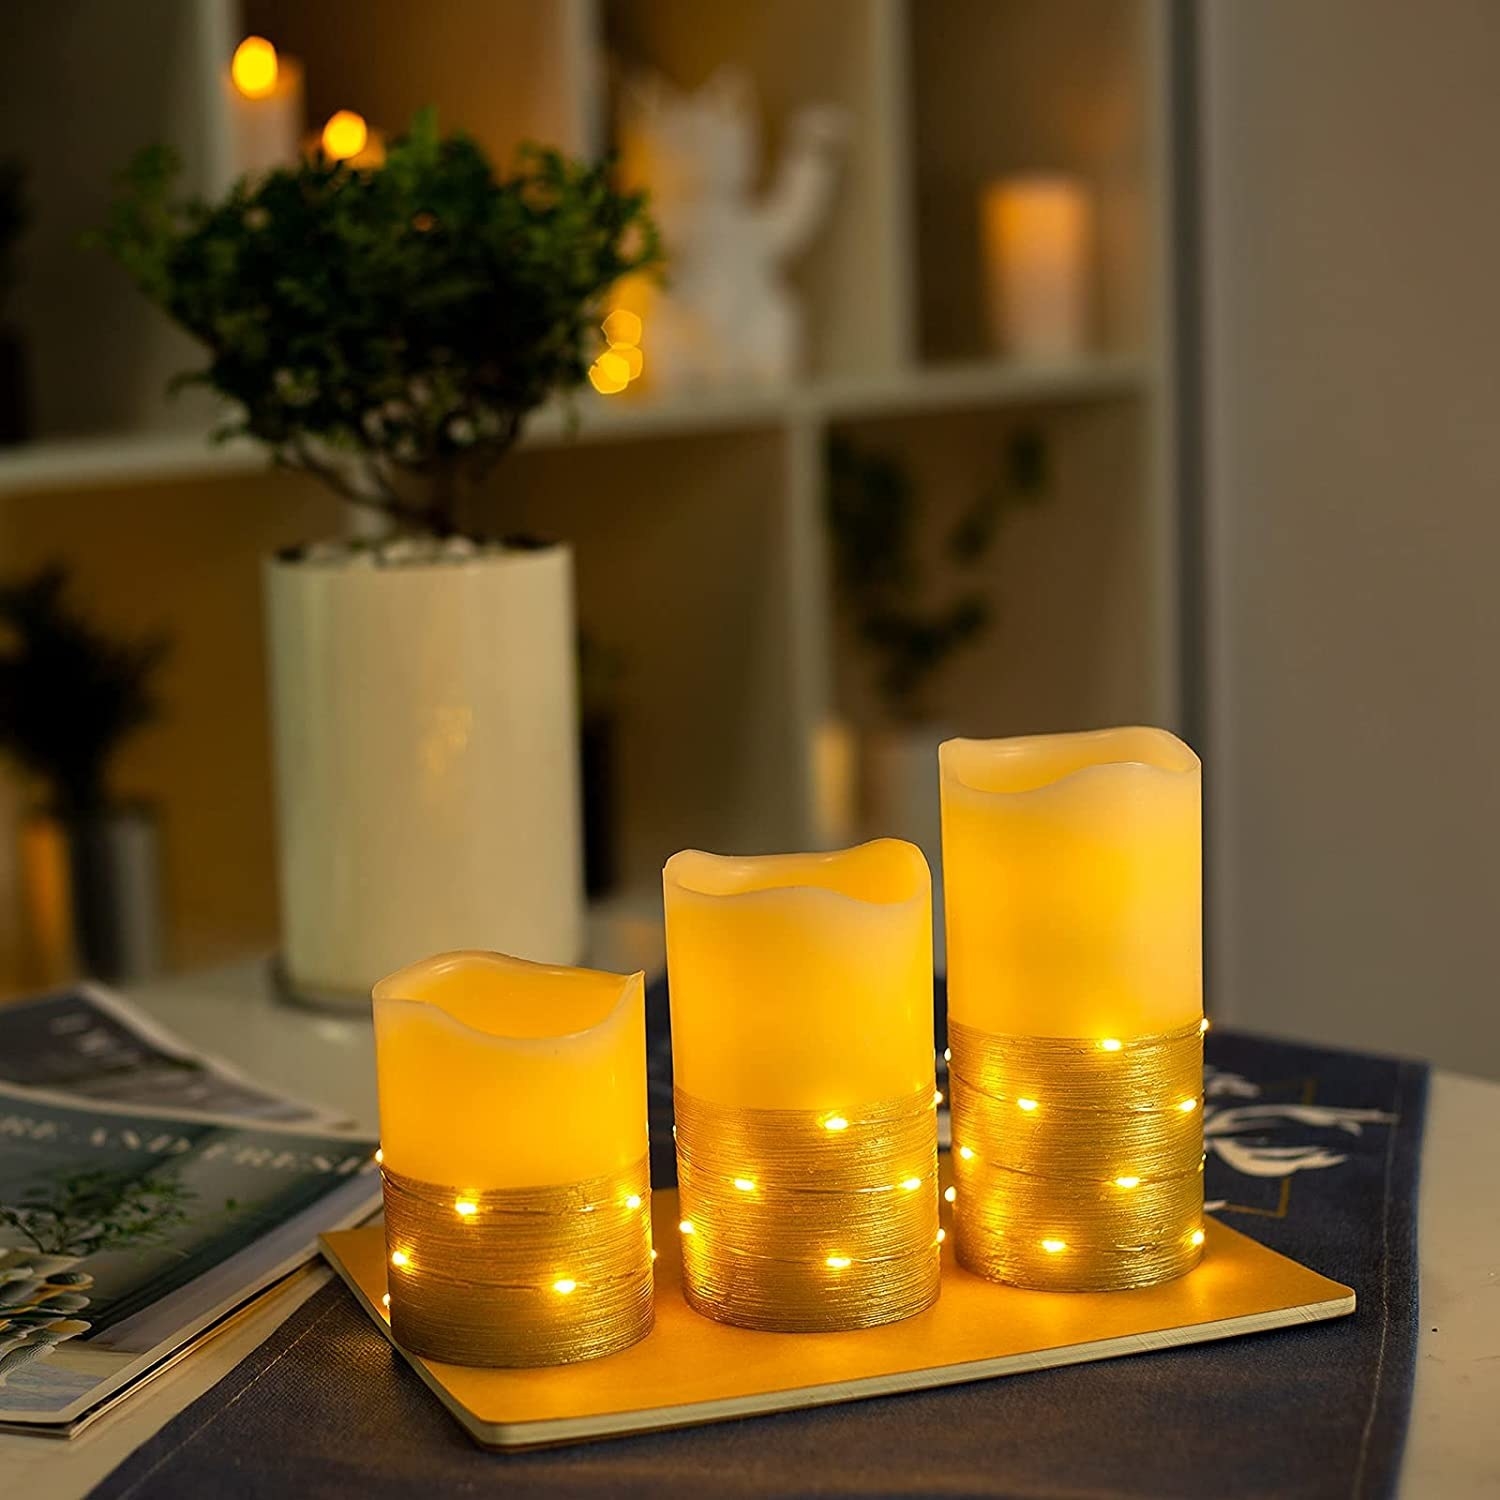 The three candles in different heights on a tray with gold bottoms and string lights